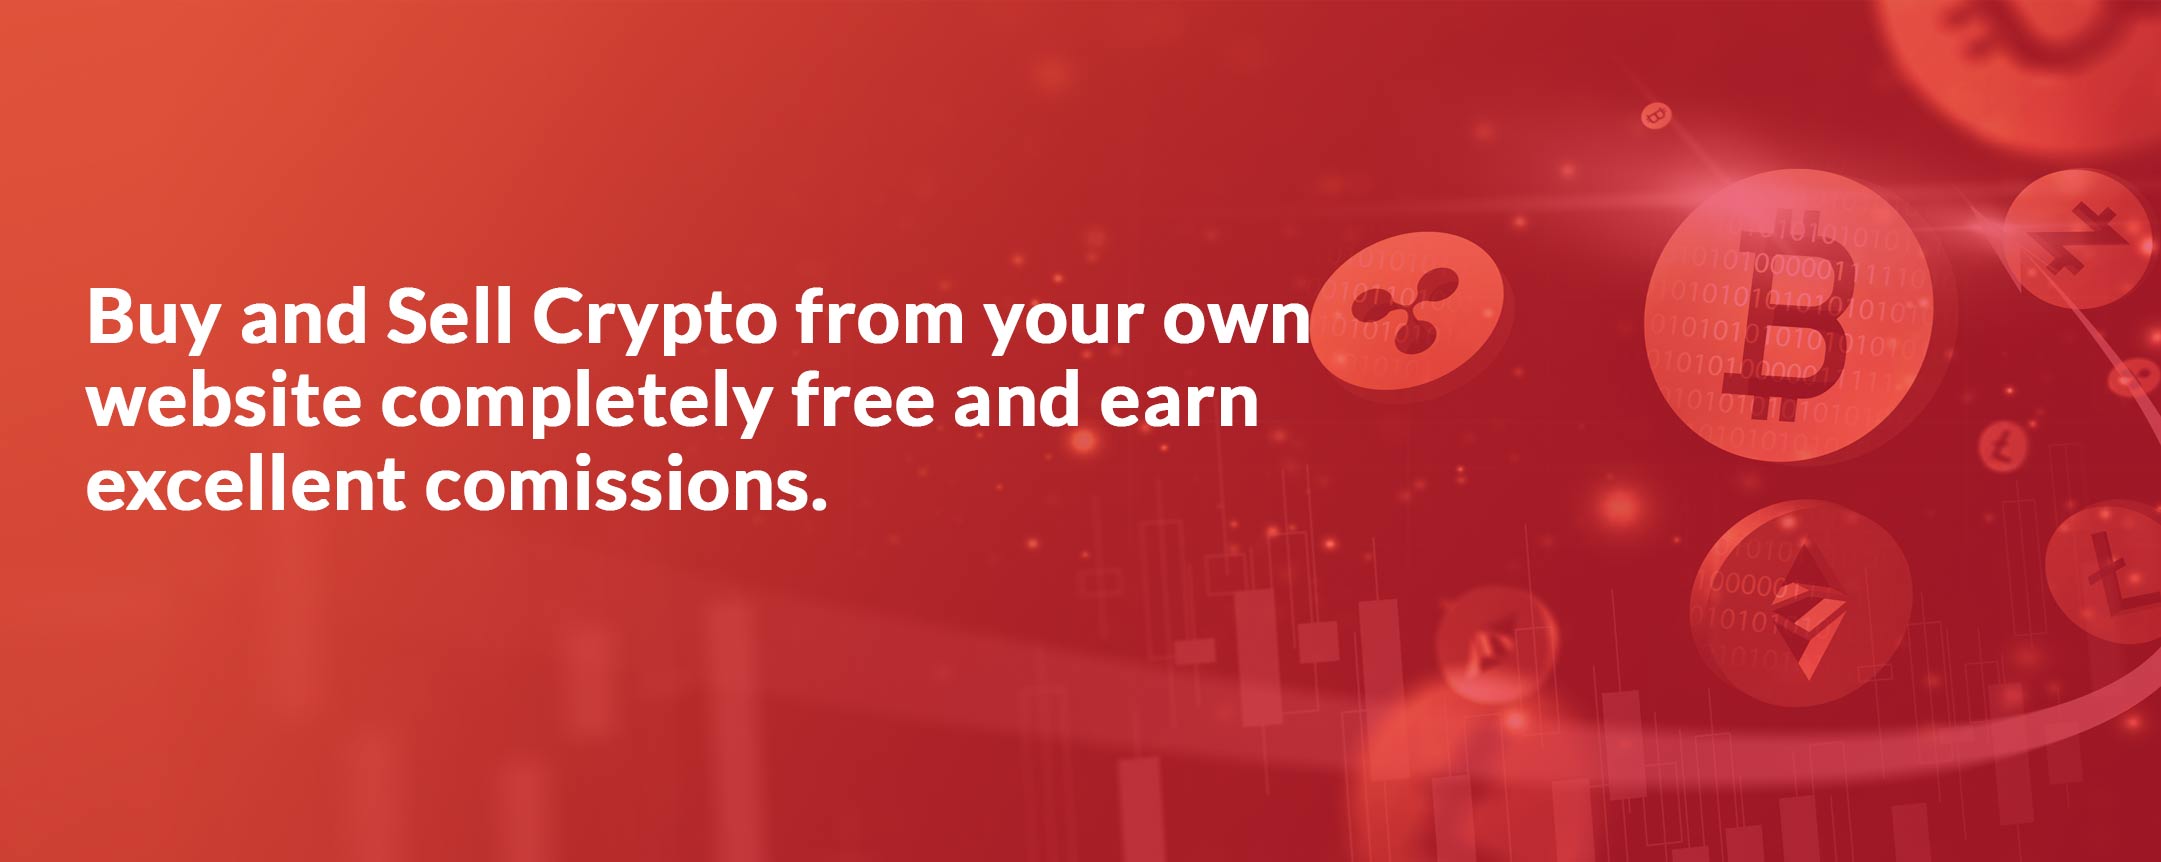 Free Buy Sell Crypto From Your Website